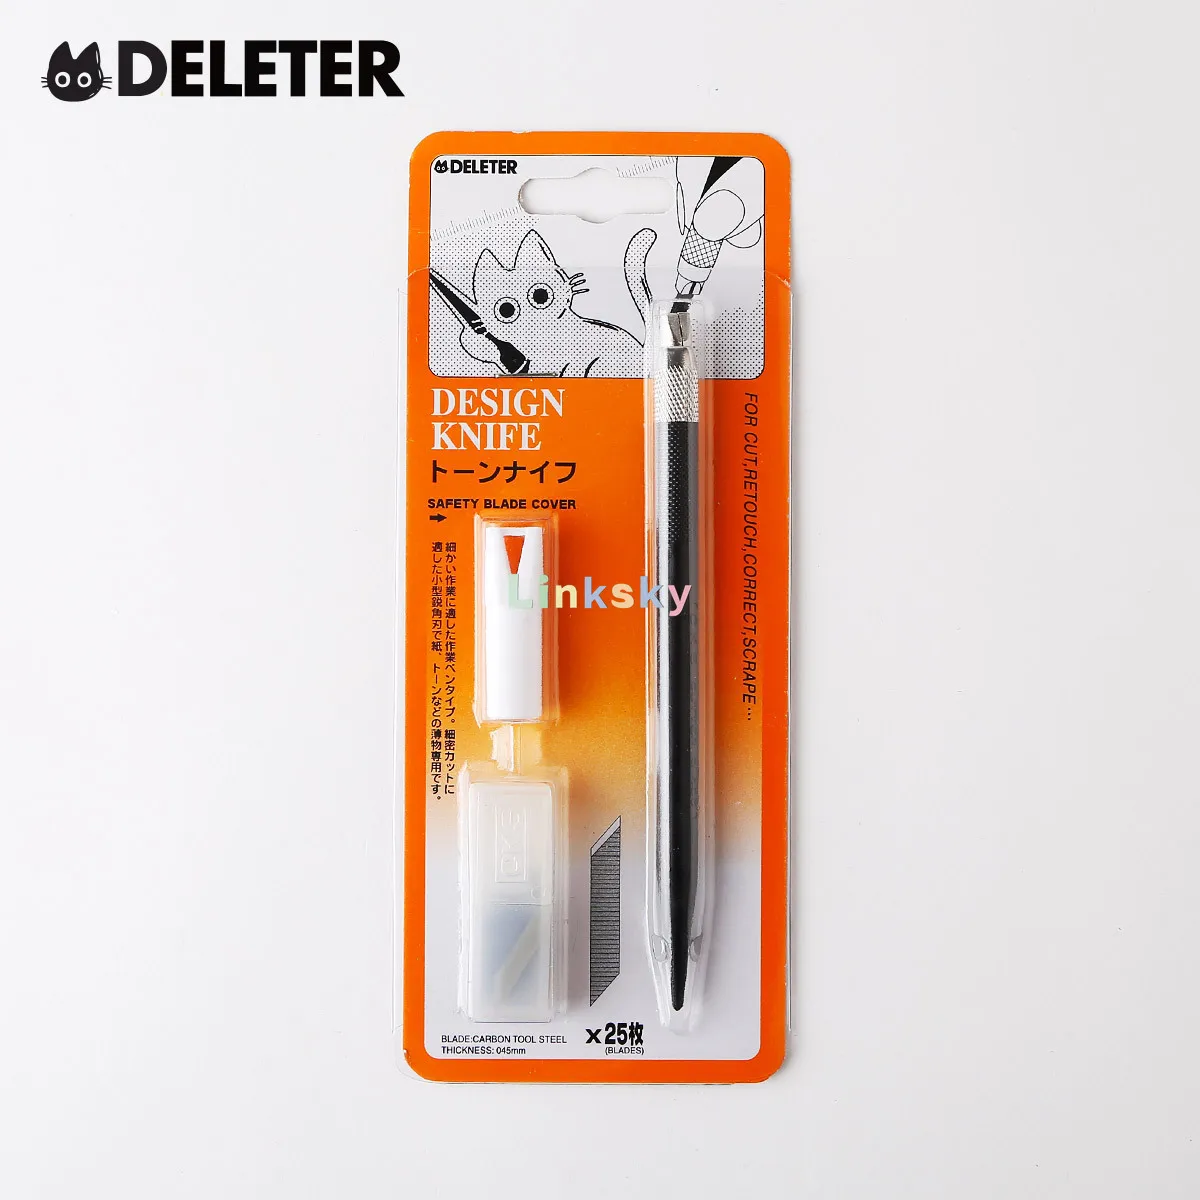 DELETER INC. Tone knife ,With 1 blade, It is suitable for detailed